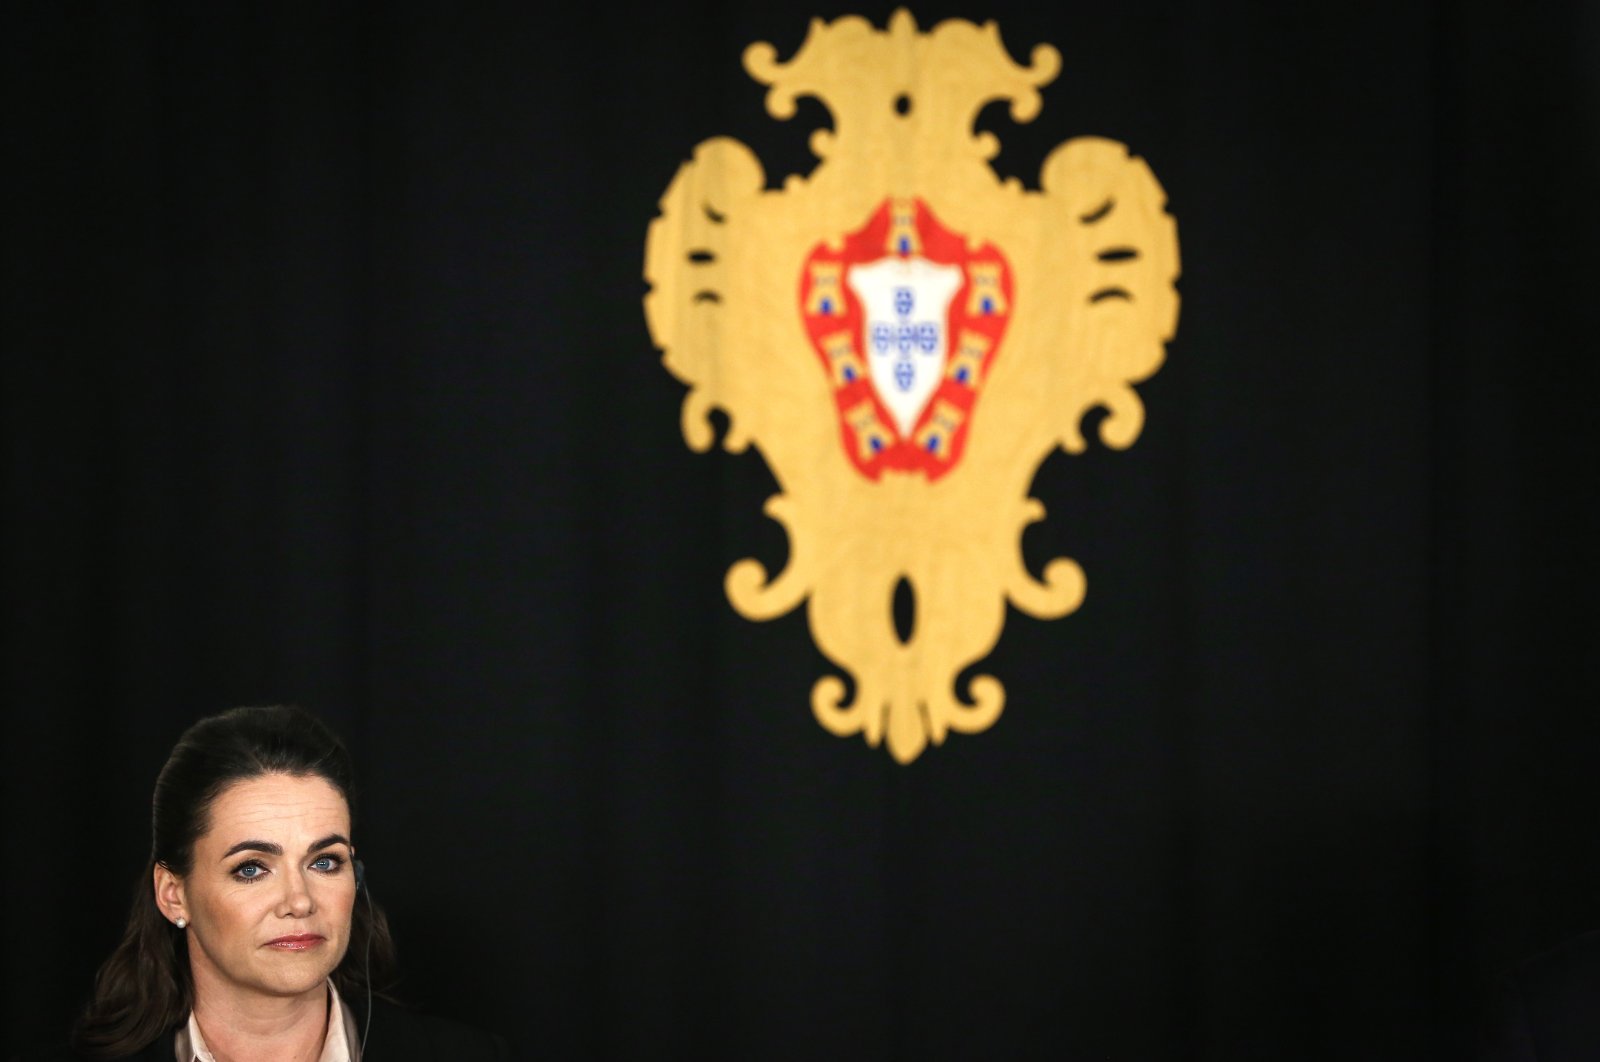 Hungarian President Katalin Novak attends a press conference with the Portuguese president after their meeting at Belem Palace in Lisbon, Portugal, Feb. 23, 2023. (EPA Photo)